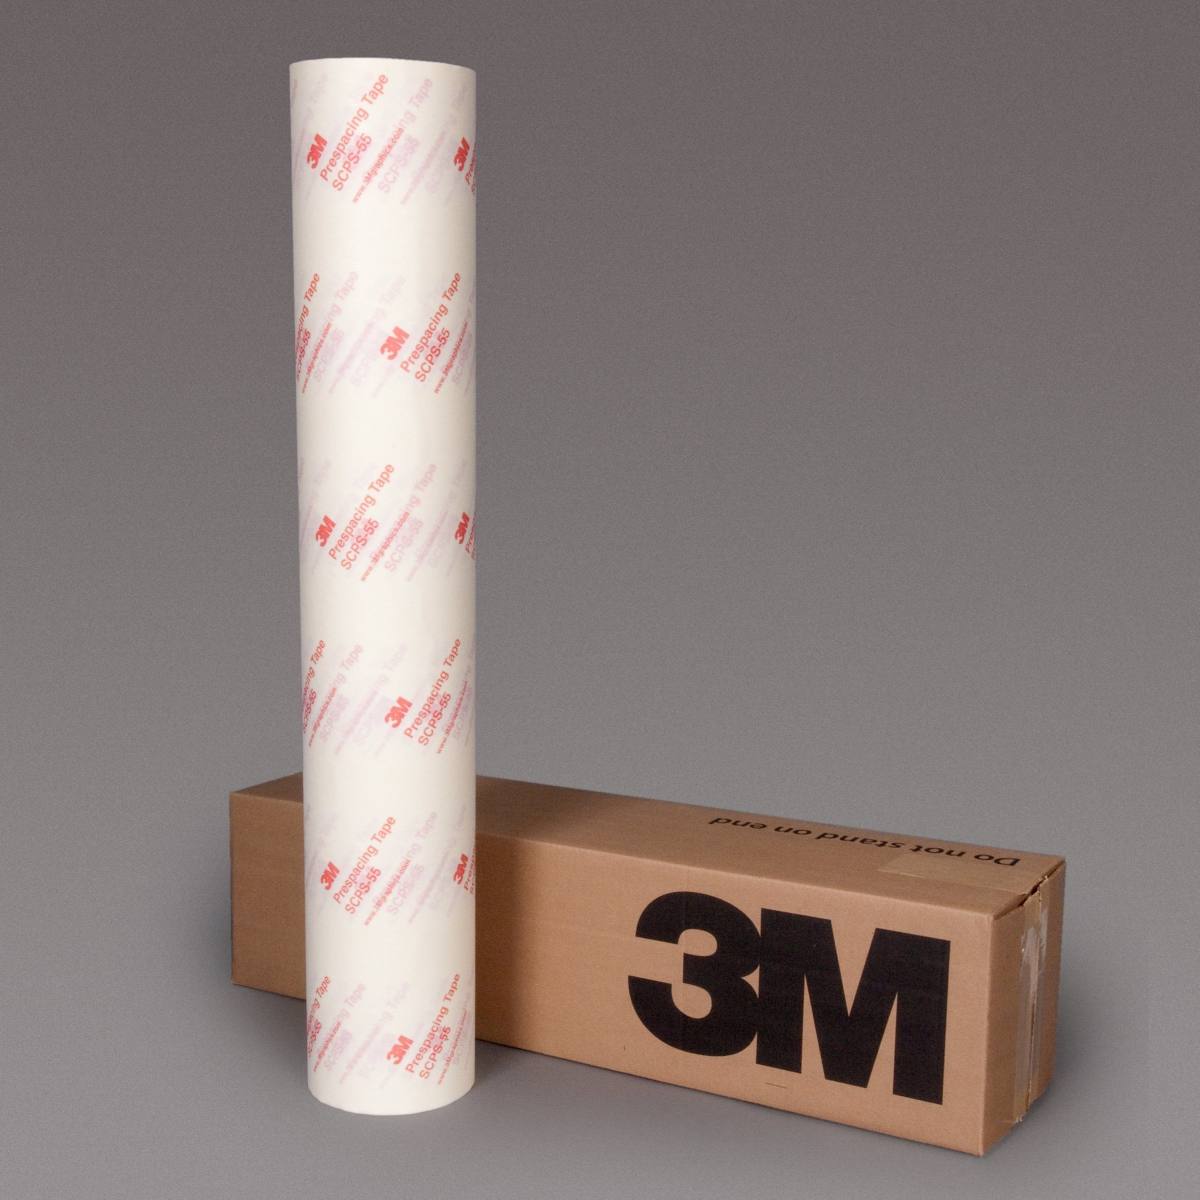 3M Application-Tape SCPS-55 1,22m x 91,4m